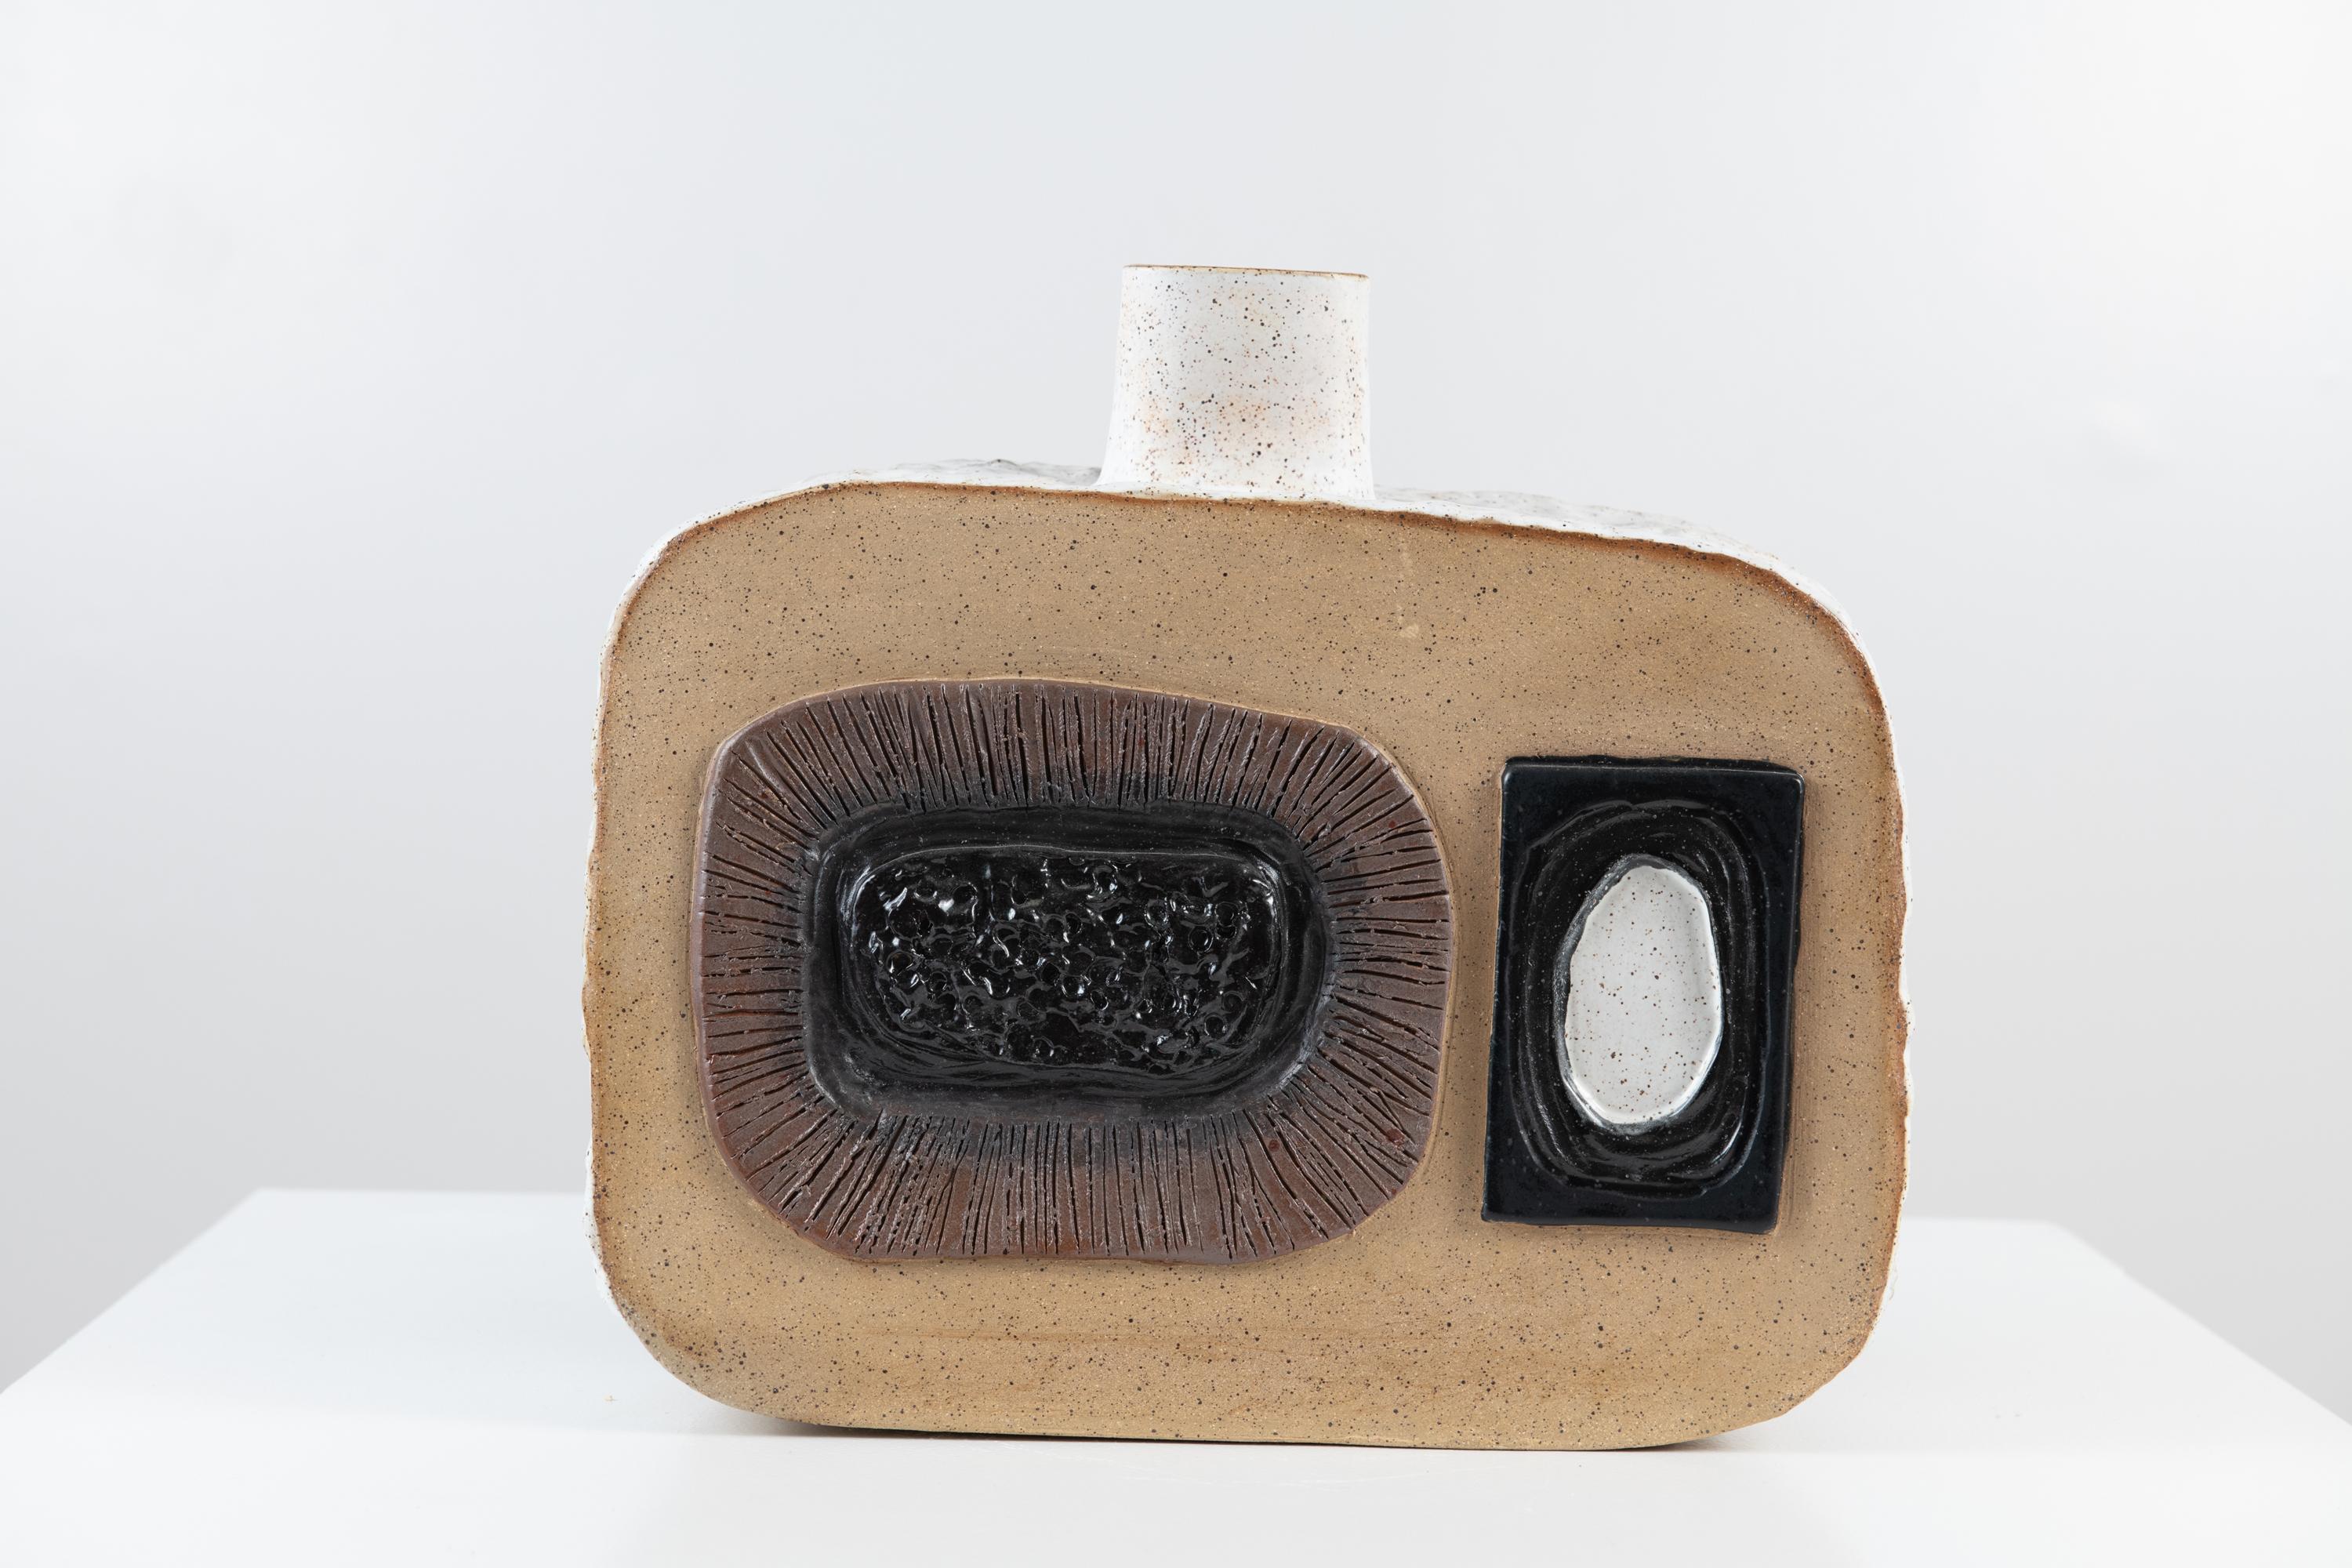 Trish DeMasi
Moderno Vessel, 2021
Glazed and raw speckled stoneware
Measures: 4 x 13 x 12 in.